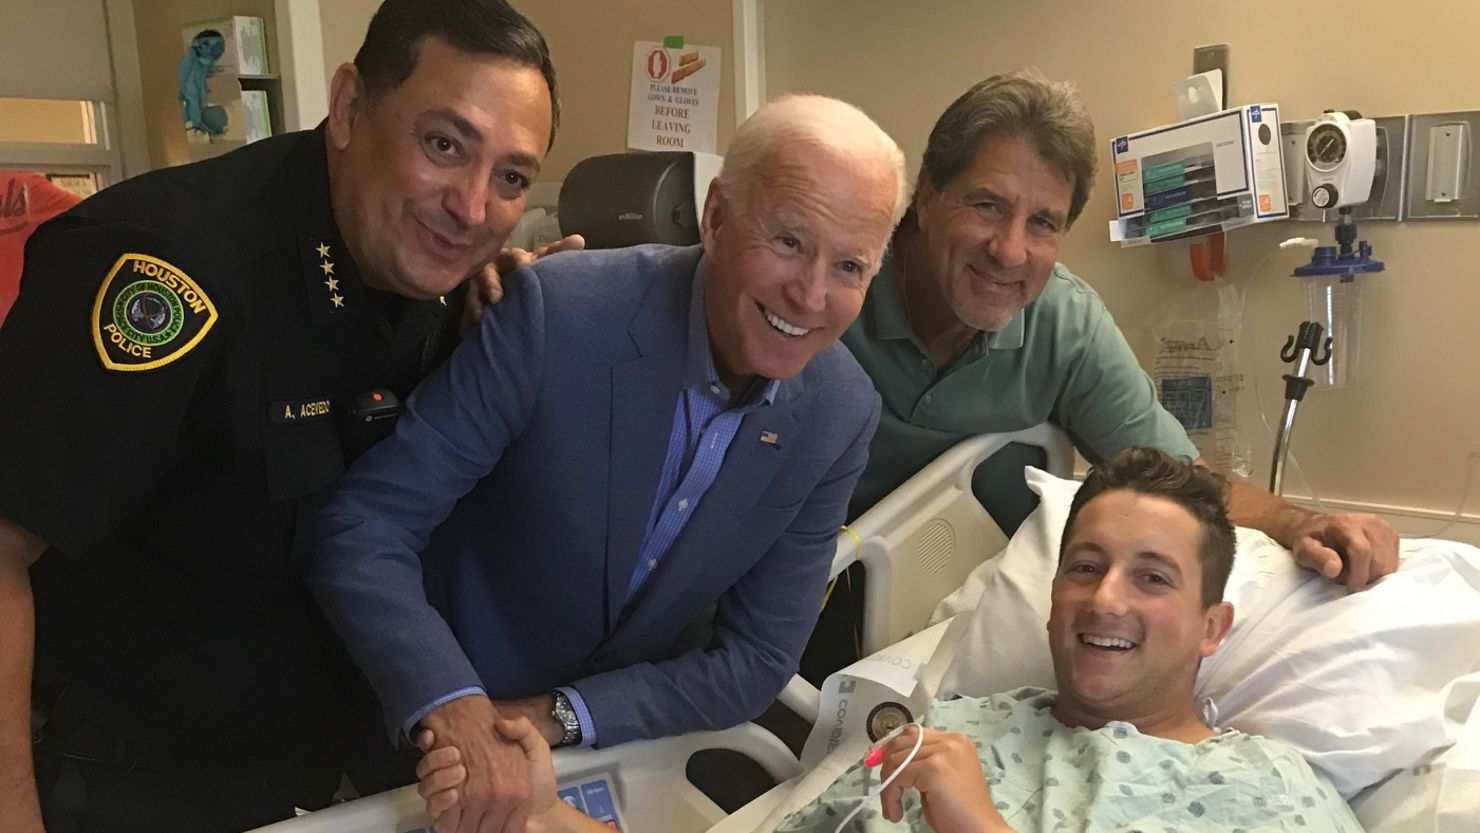 Officer Taylor Roccaforte was recovering from gunshot wounds when then-candidate Joe Biden came to see him in the hospital. His father, Samuel Roccaforte (right), and Houston Police Chief Art Acevedo, were also at his bedside.